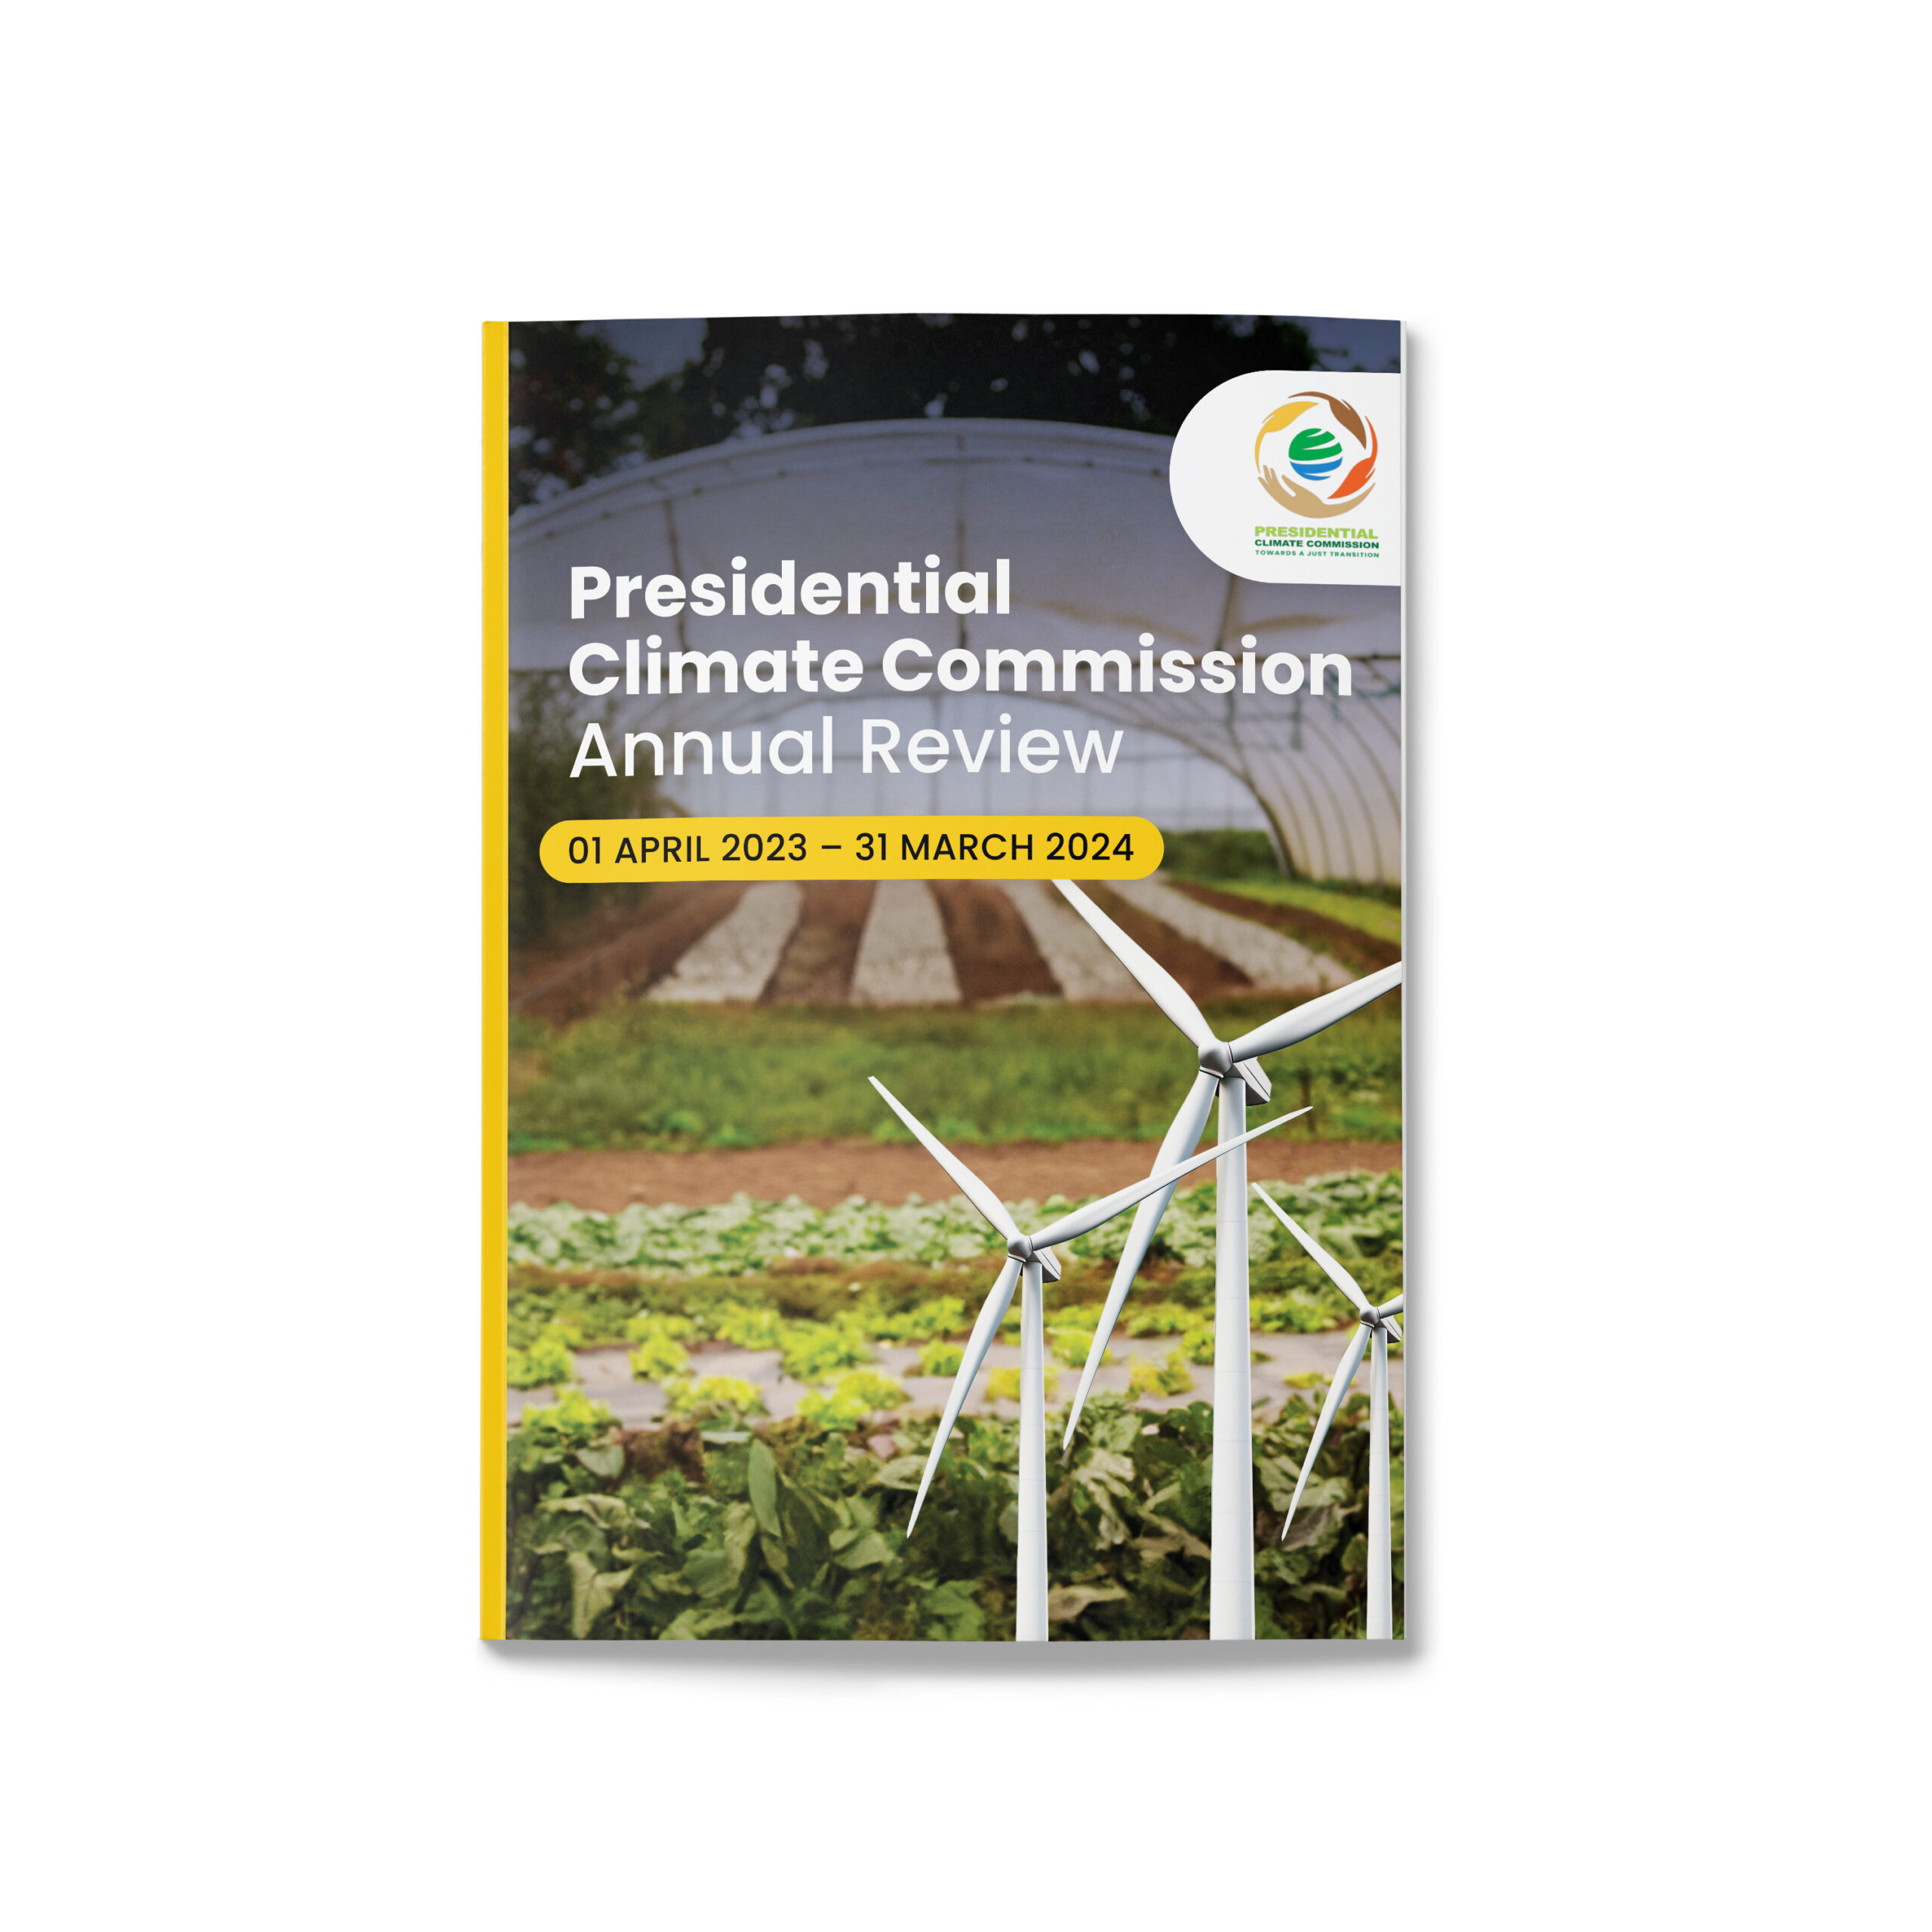 Presidential Climate Commission Annual Report Design Cover White Mockup